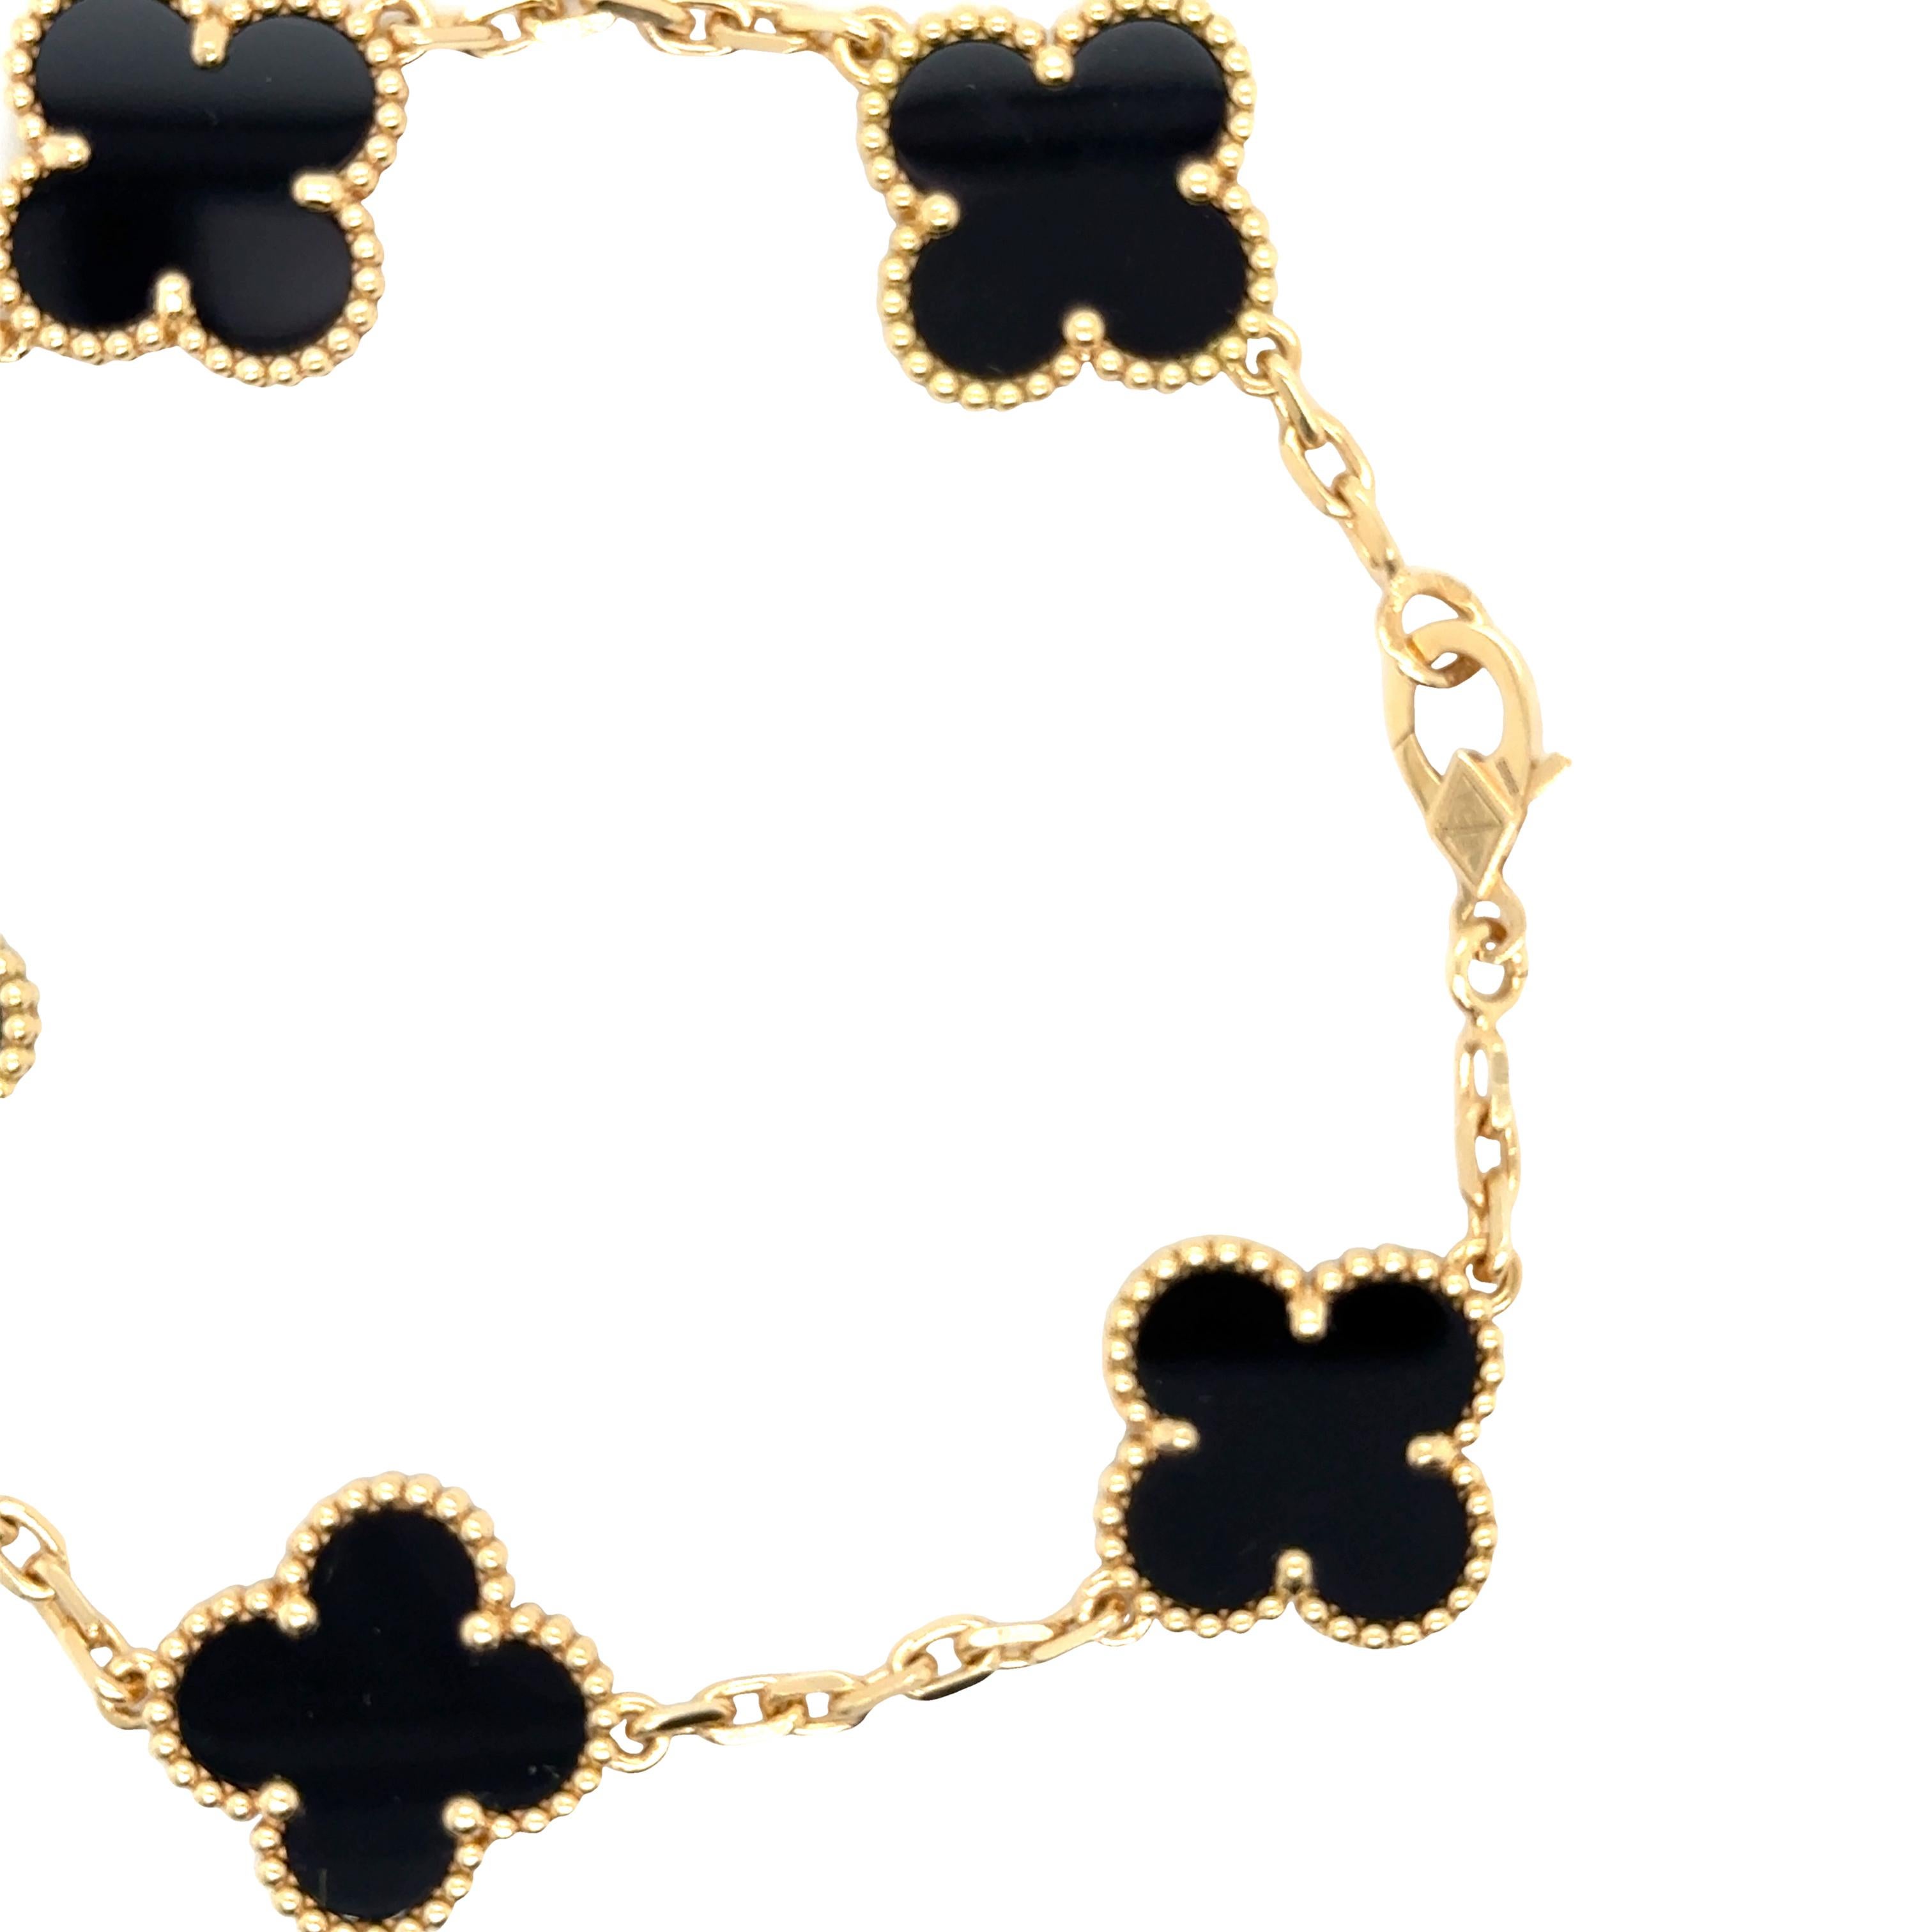 Van Cleef & Arpels Onyx bracelet VCARA41300

VCA signature design, first created in 1968, this timeless collection brings luck to each owner by its clover leaf. 

An iconic collection, the Alhambra is a symbol of luck, with a border of golden beads.